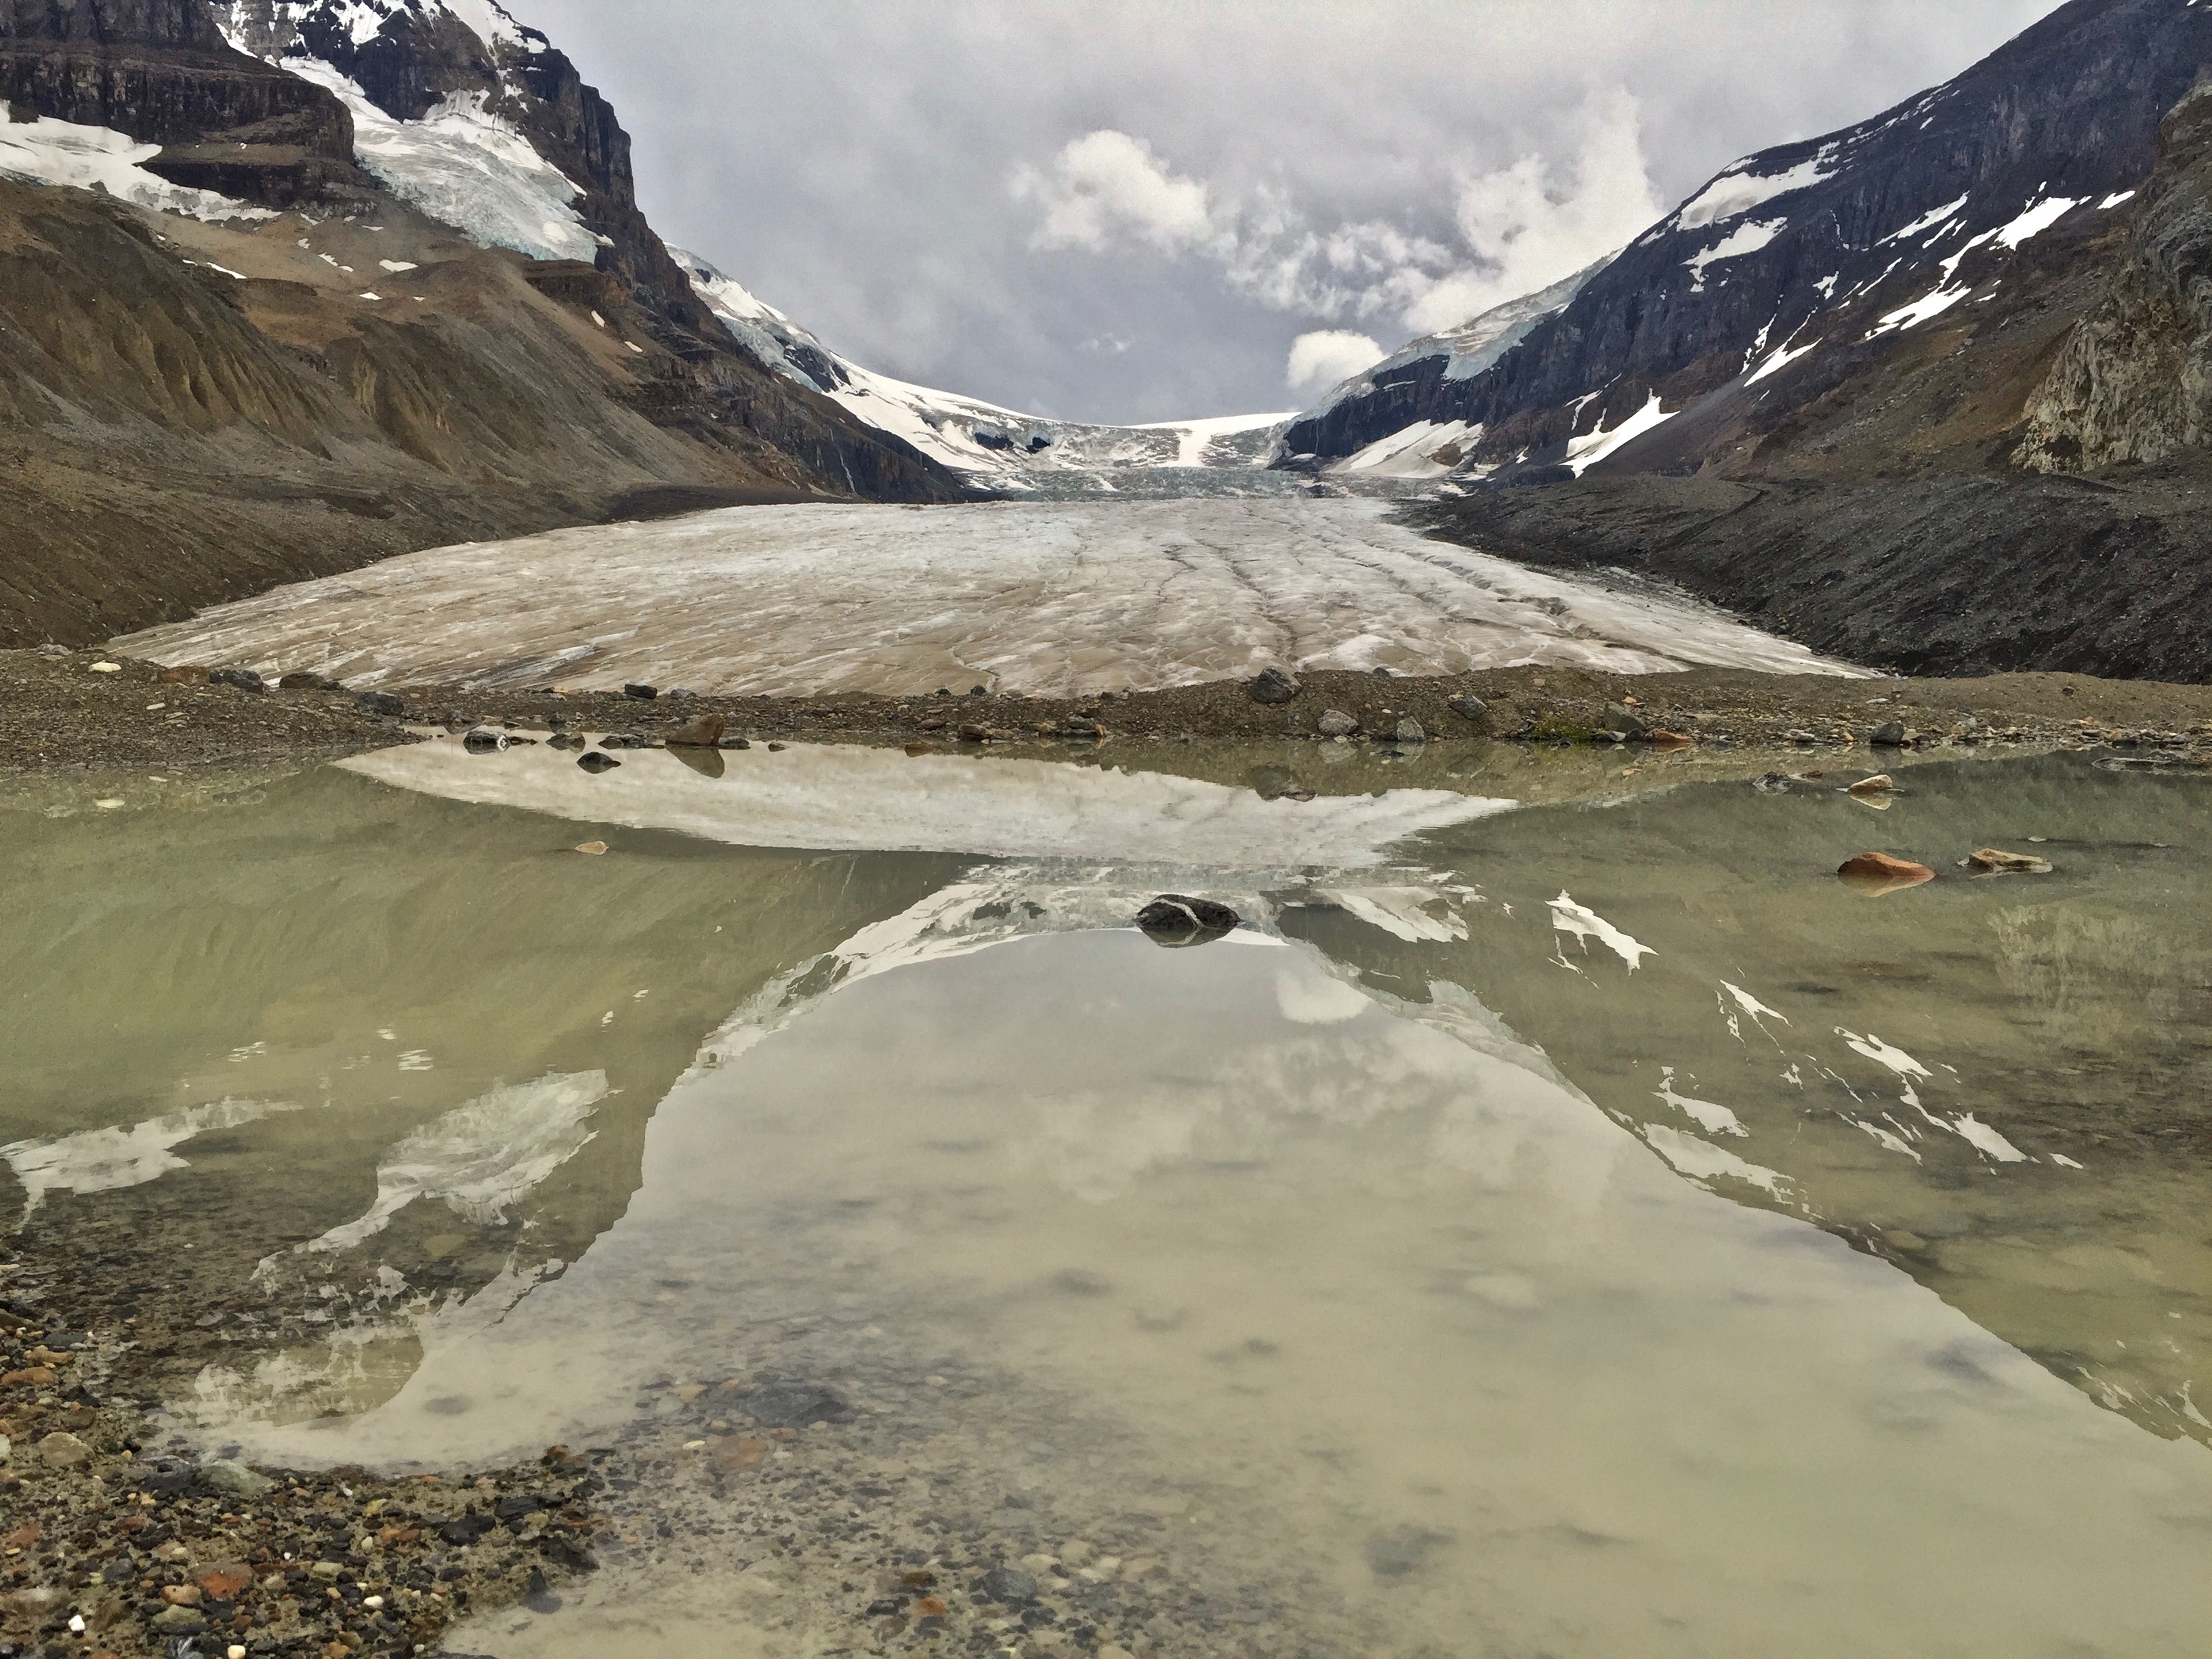 View of a shrinking glacier